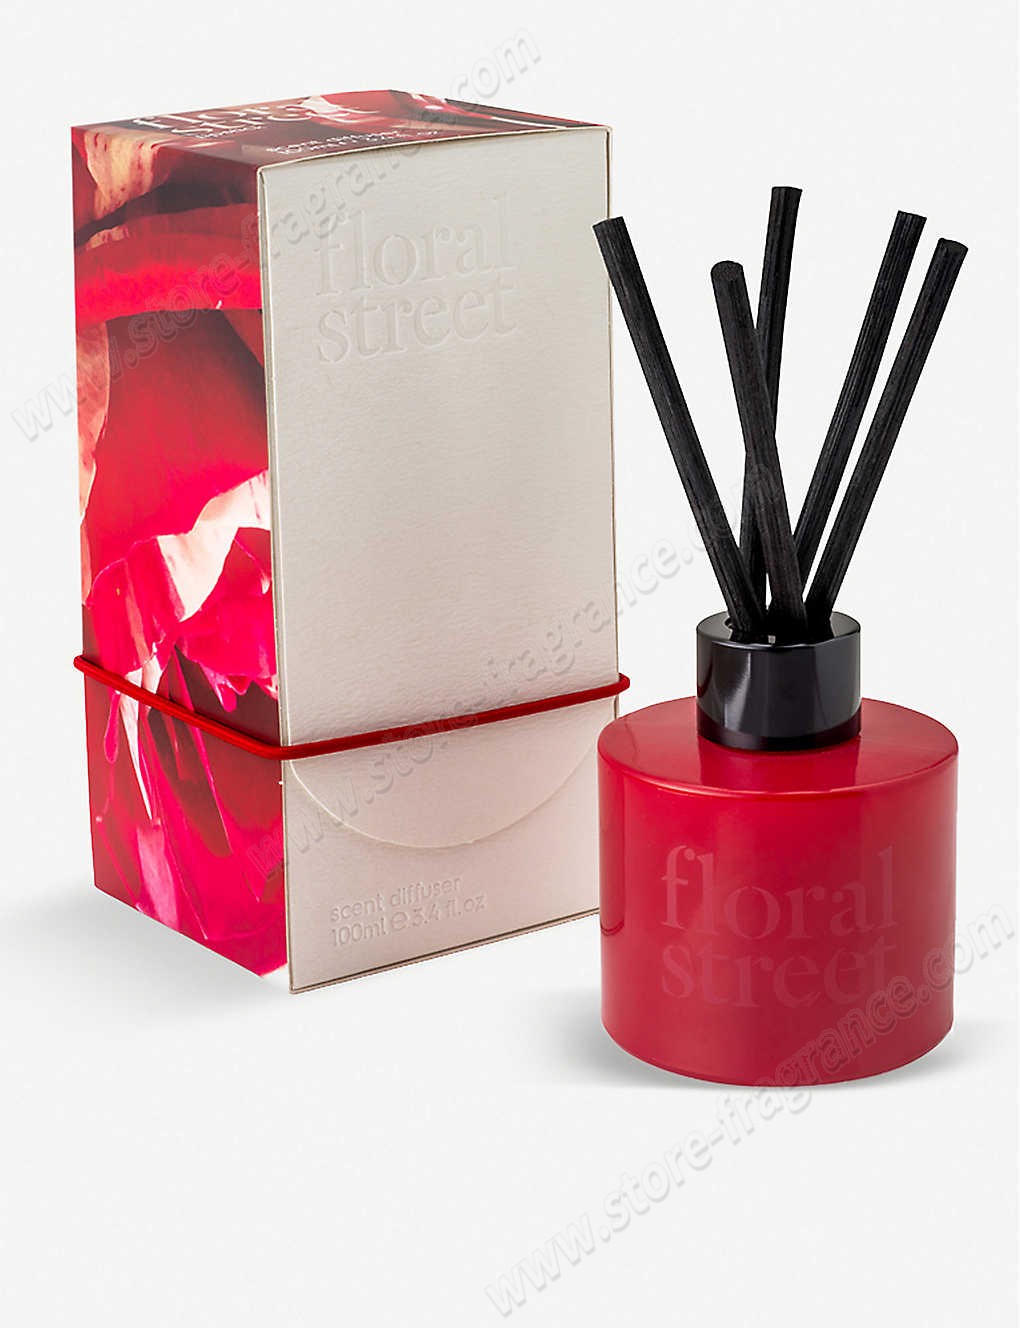 FLORAL STREET/Lipstick scented diffuser 100ml Limit Offer - -1